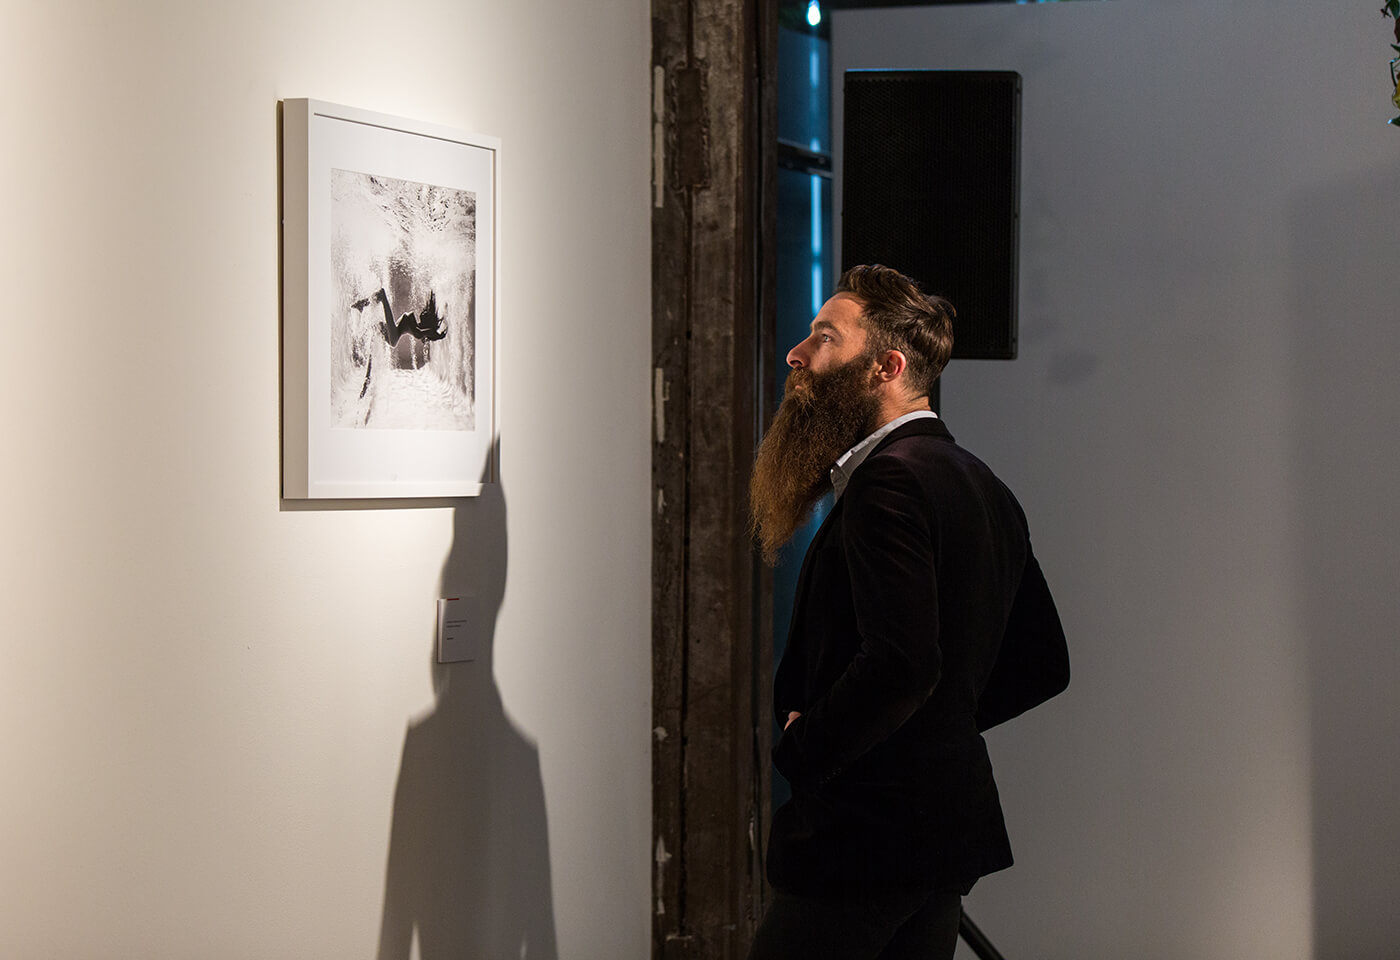 Image of patron looking at framed black and white image on wall